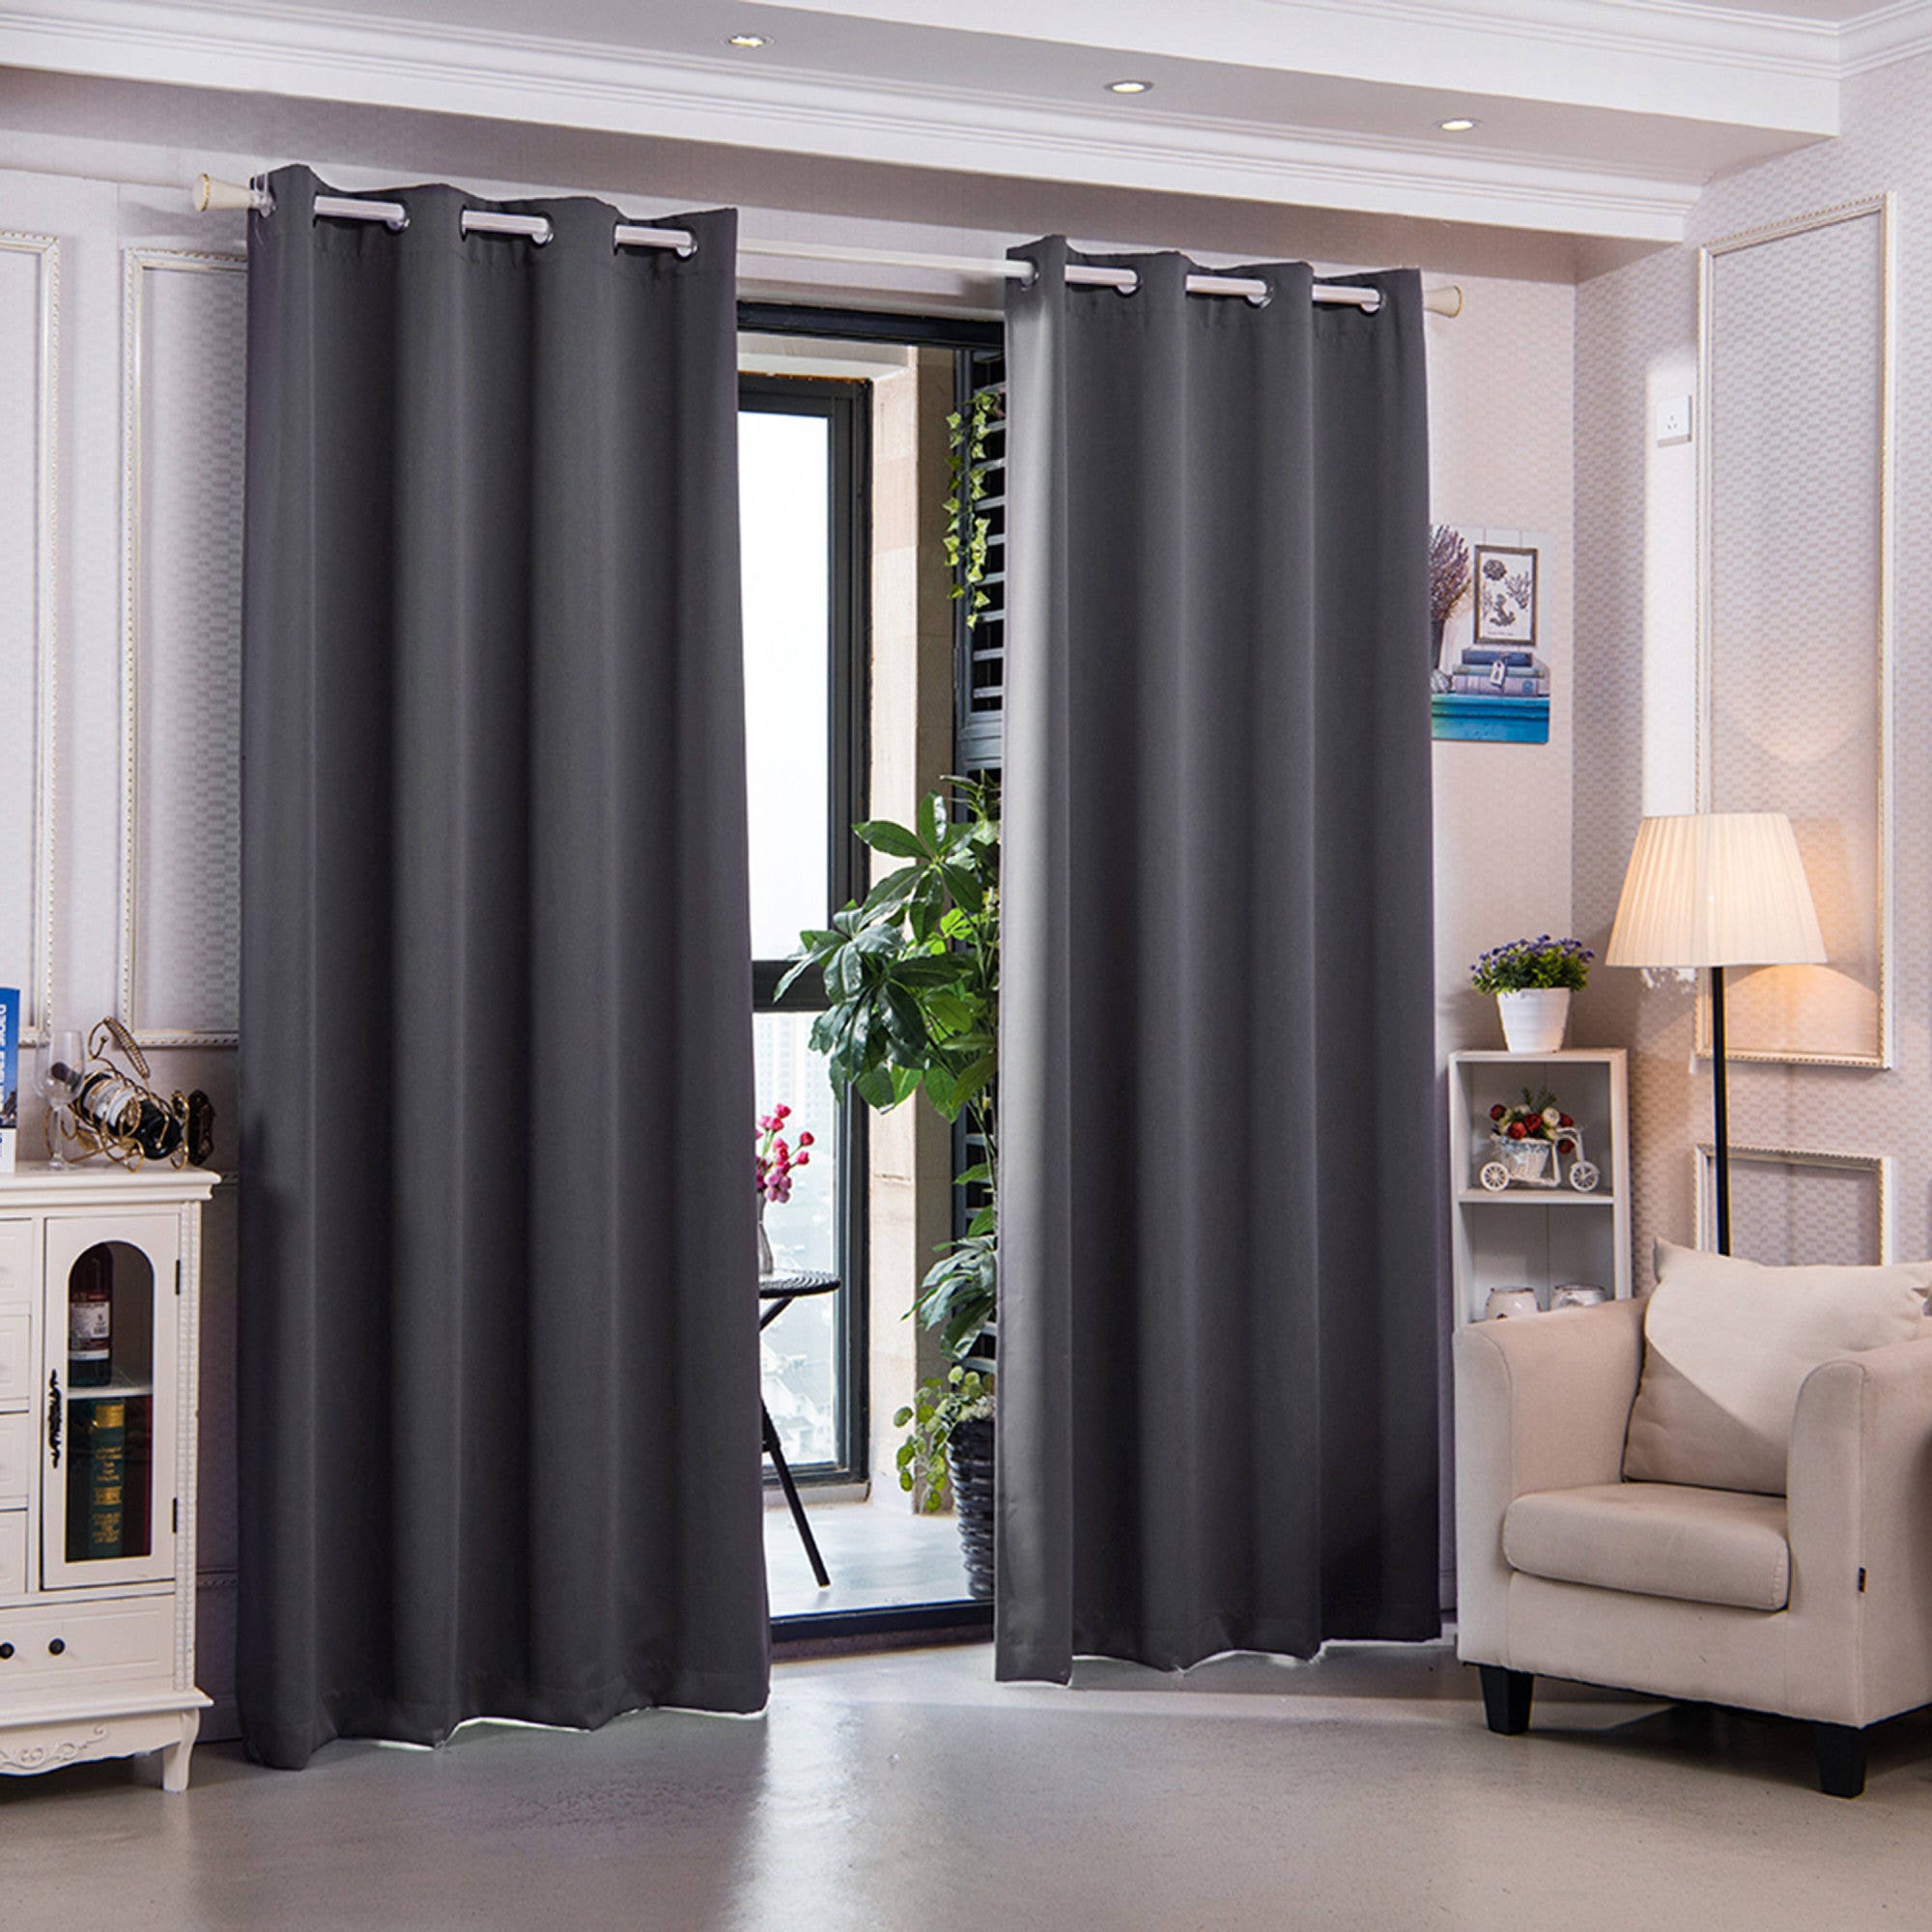 Teamson Home 84" Sparta Premium Solid Insulated Thermal Blackout Window Curtain Panels with Grommets, Dove Gray